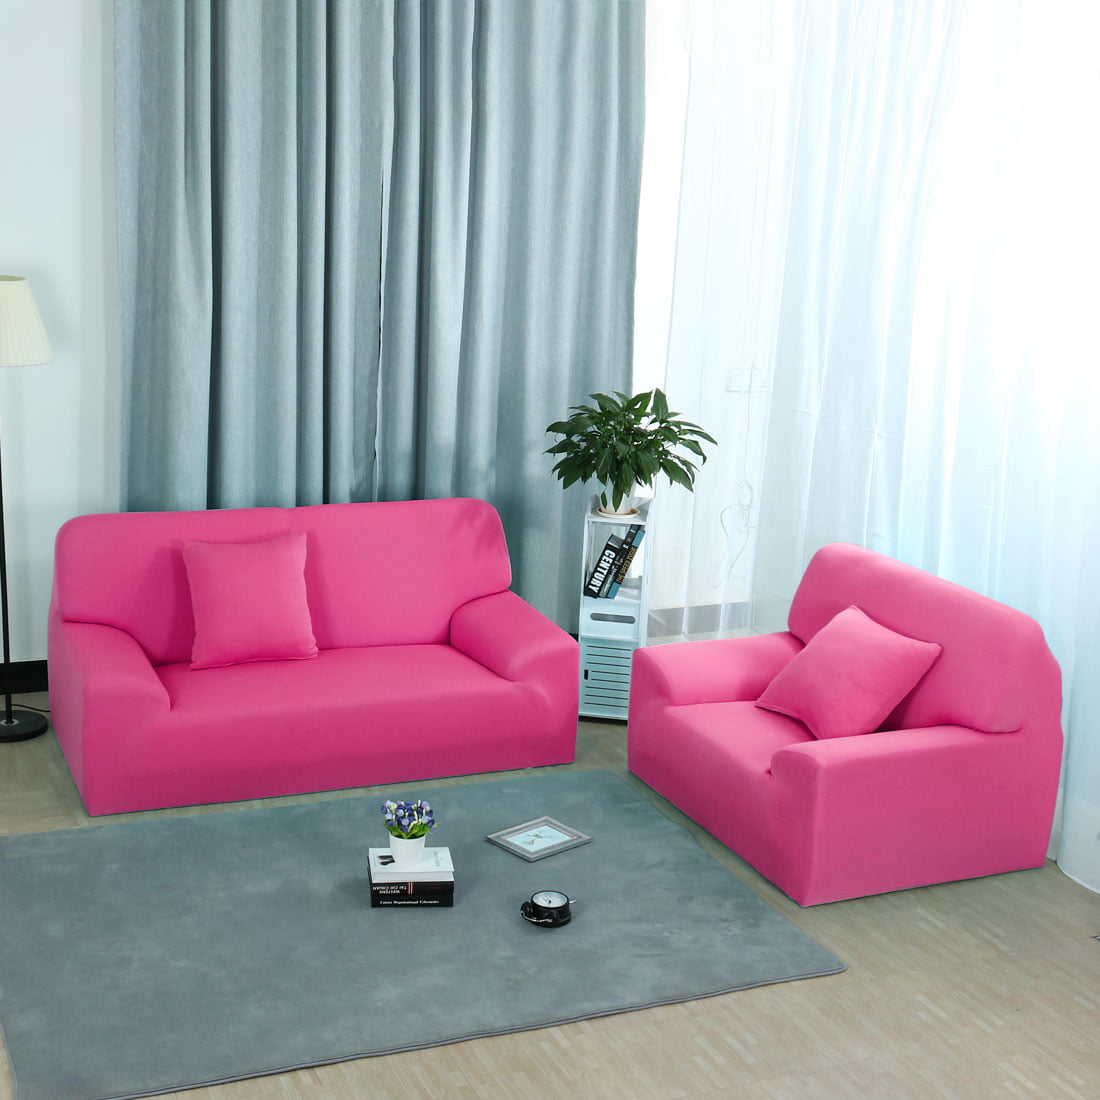 Details about   Sofa Cover With Fixing Strips Soft Elastic Slipcover Furniture Practical 